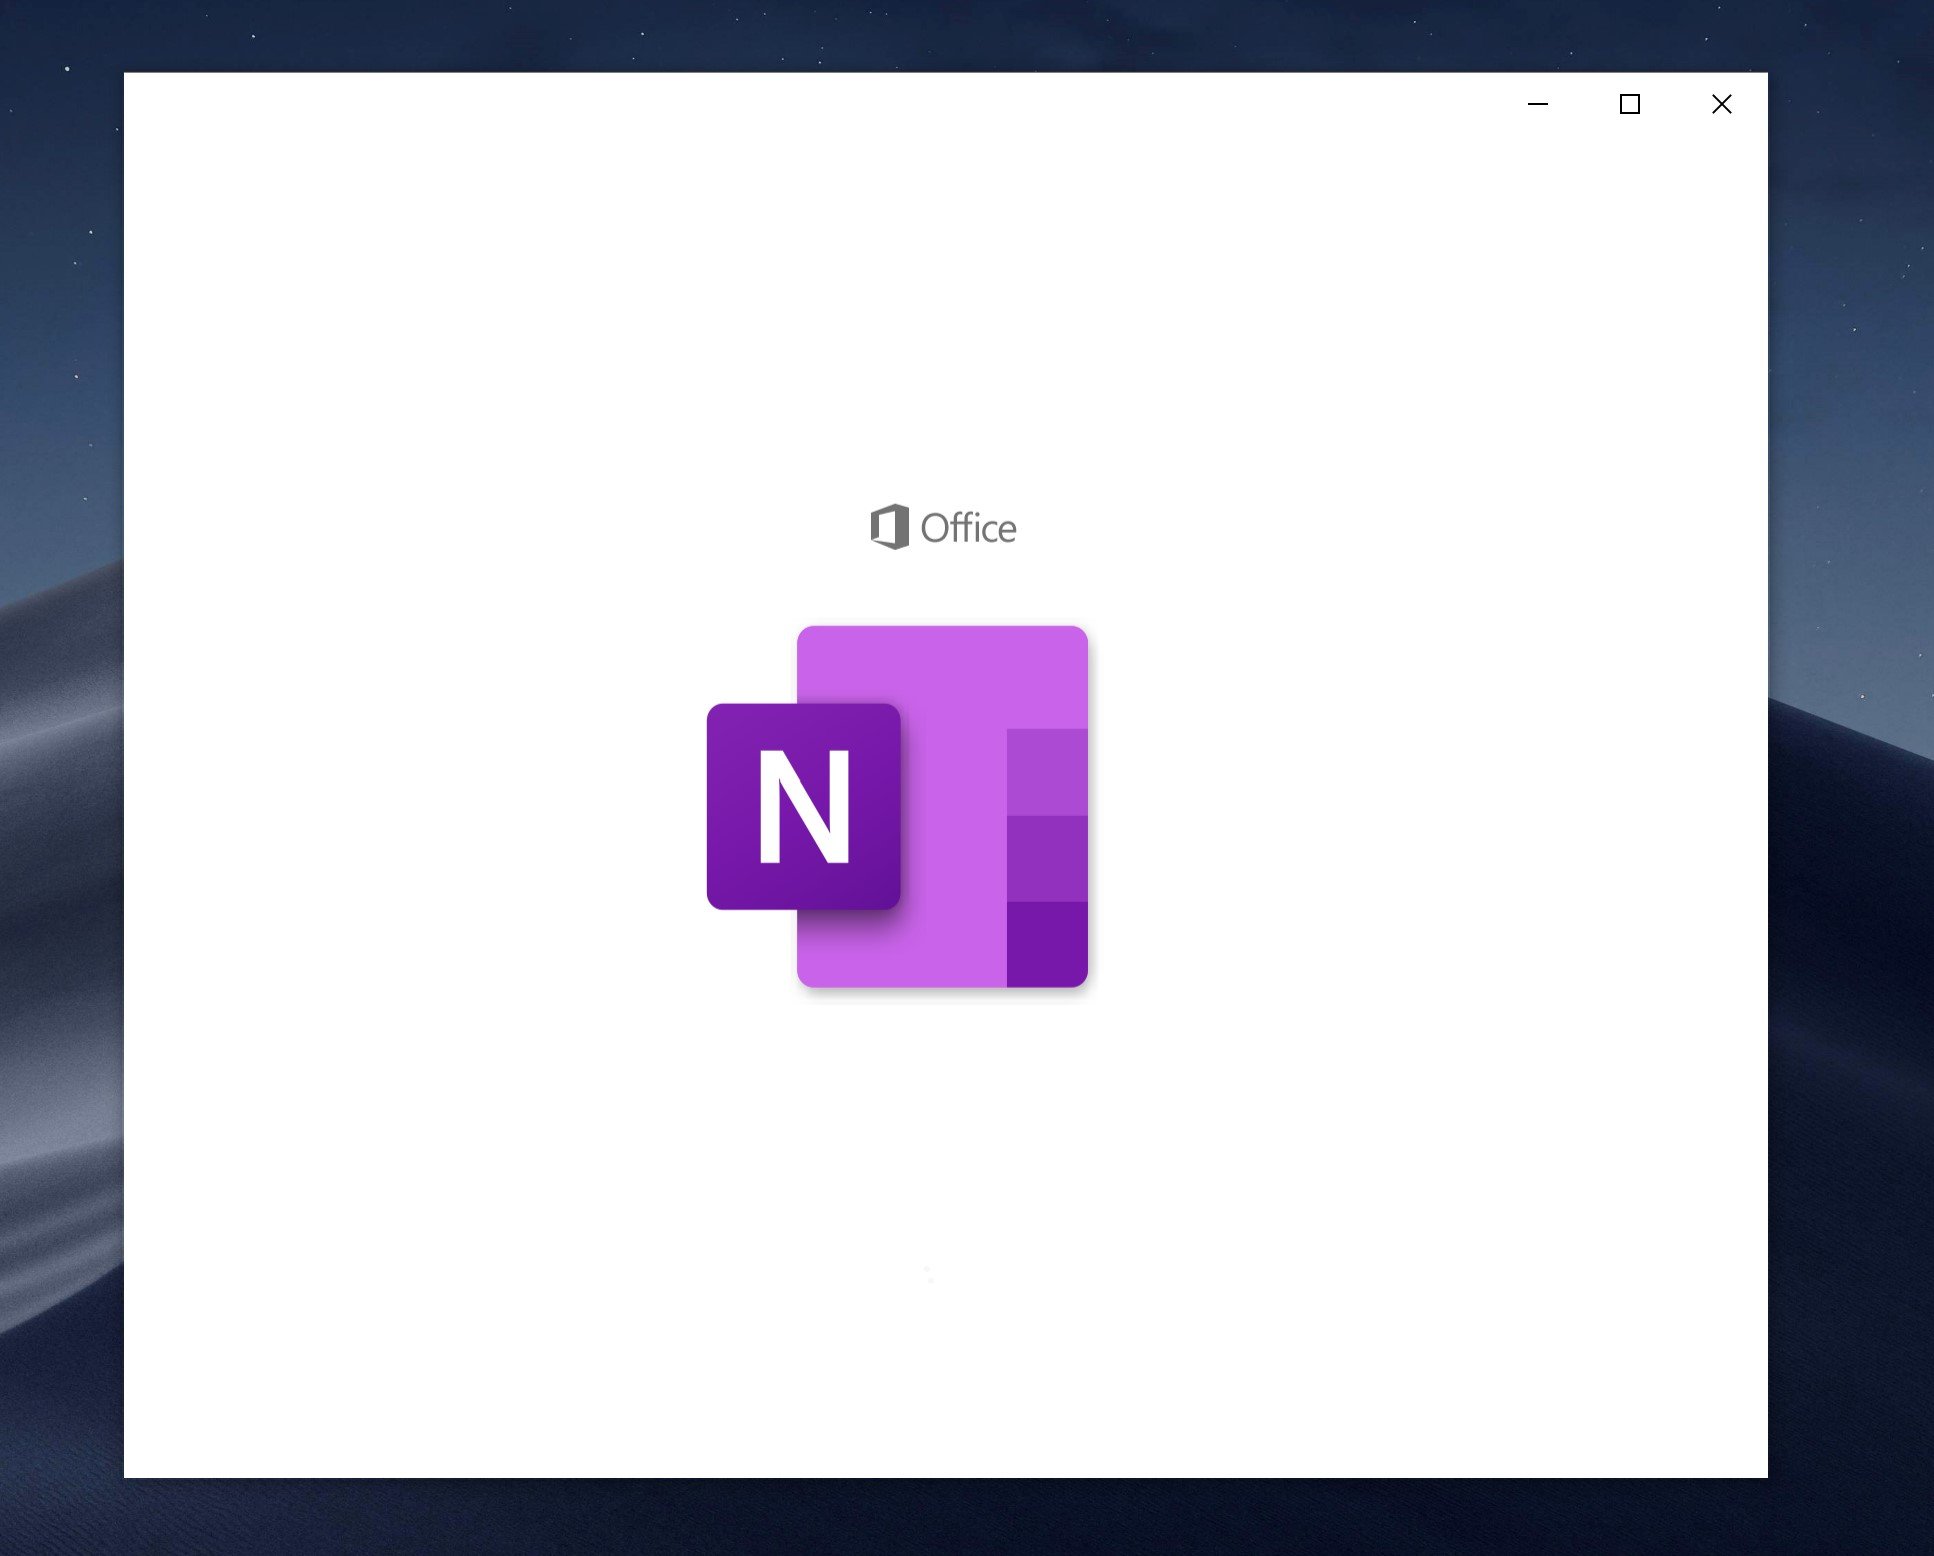 OneNote gets new icon on Windows 10 and iOS | Windows Central